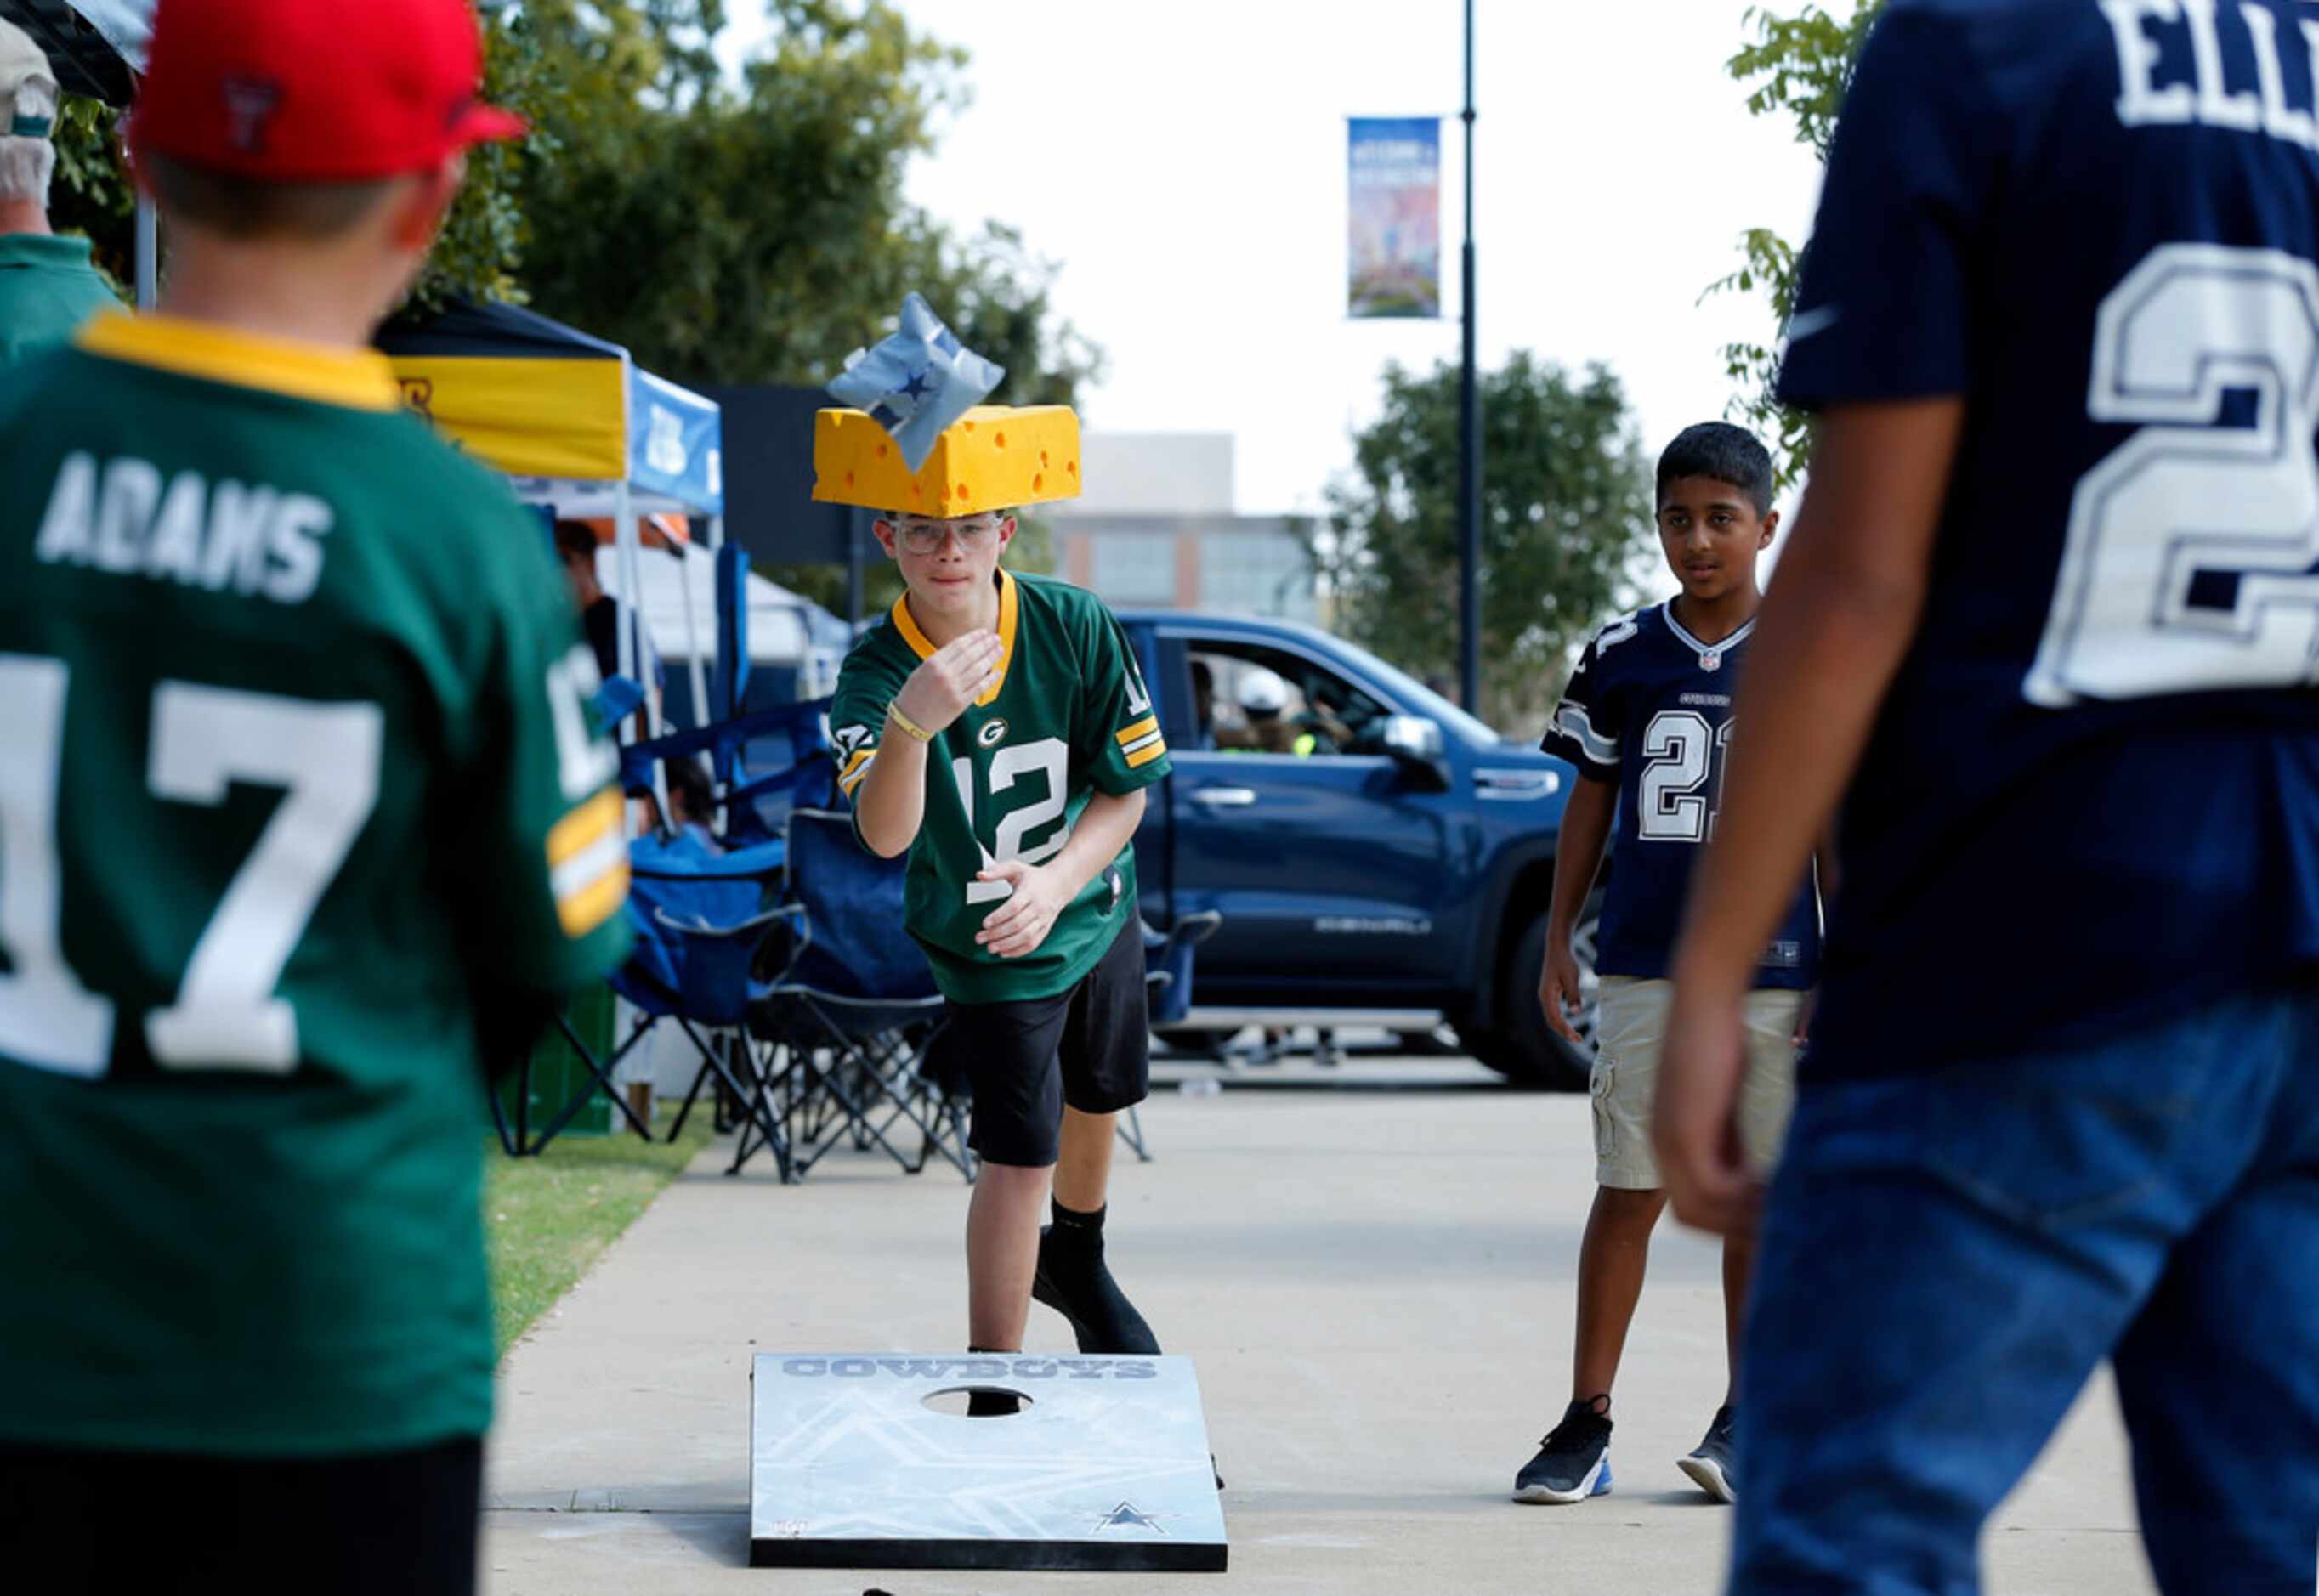 Green Bay Packers fan Daxston Swimmer of Plains, TX tosses corn bags during a game of corn...